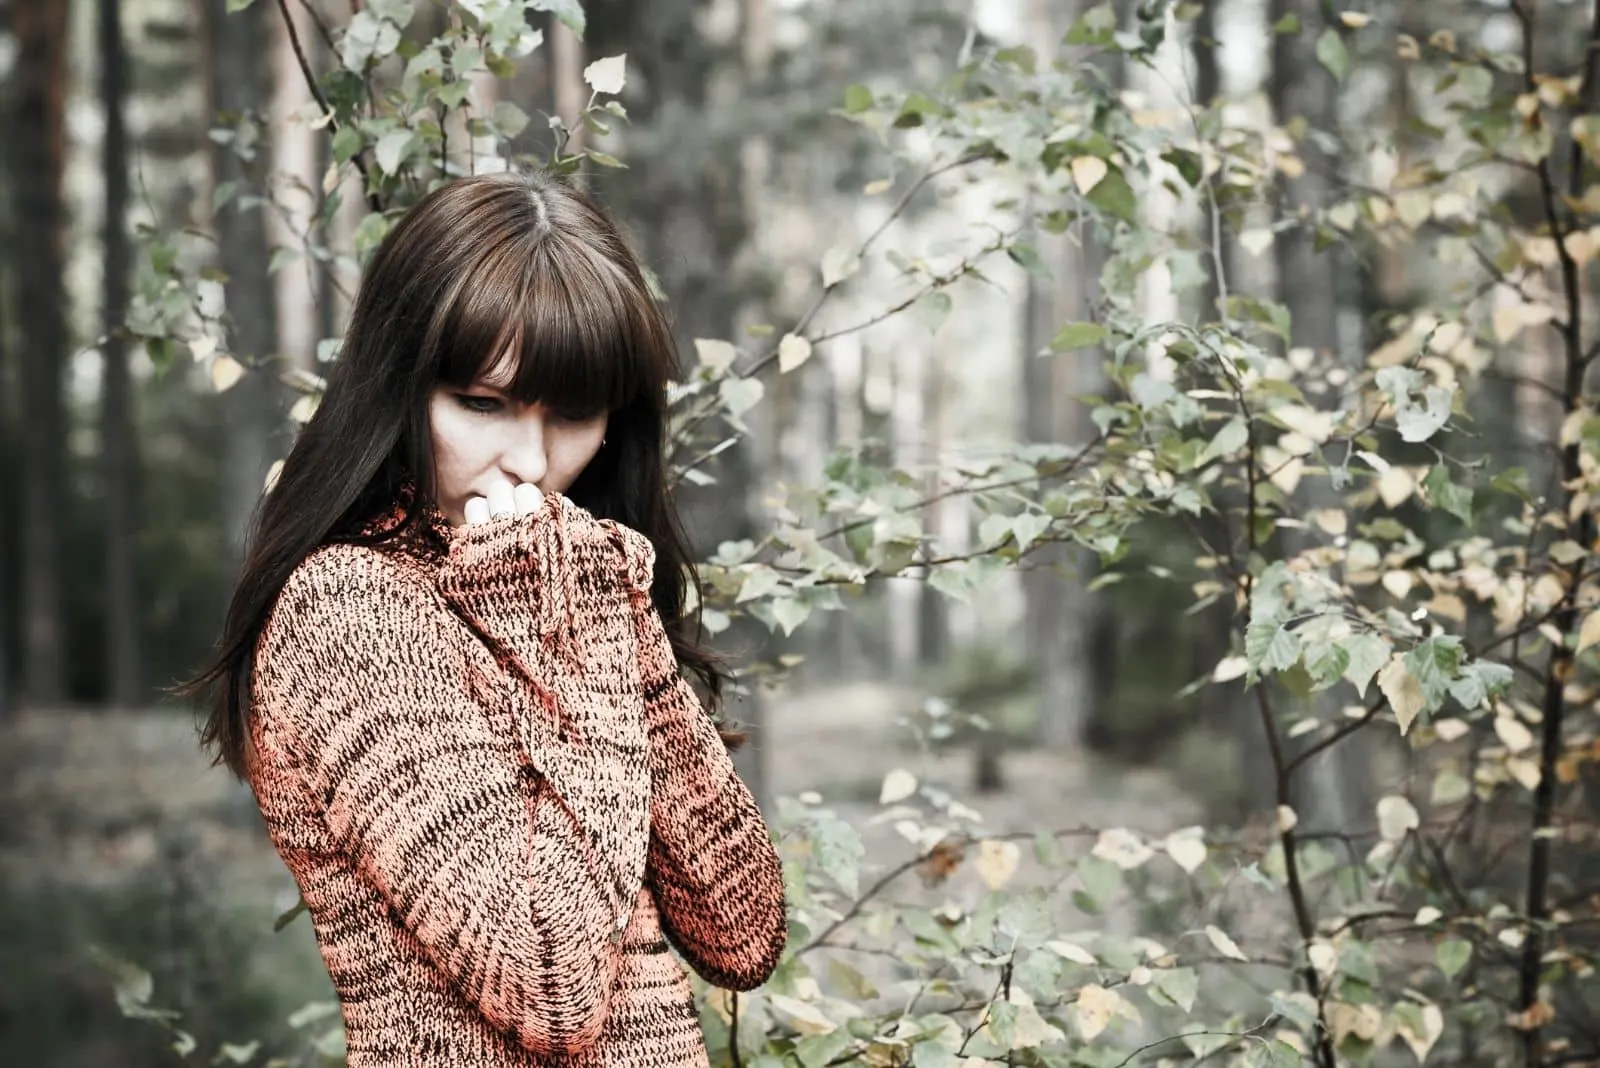 pensive woman thoughtful wearing sweater standing in the middle of the forest